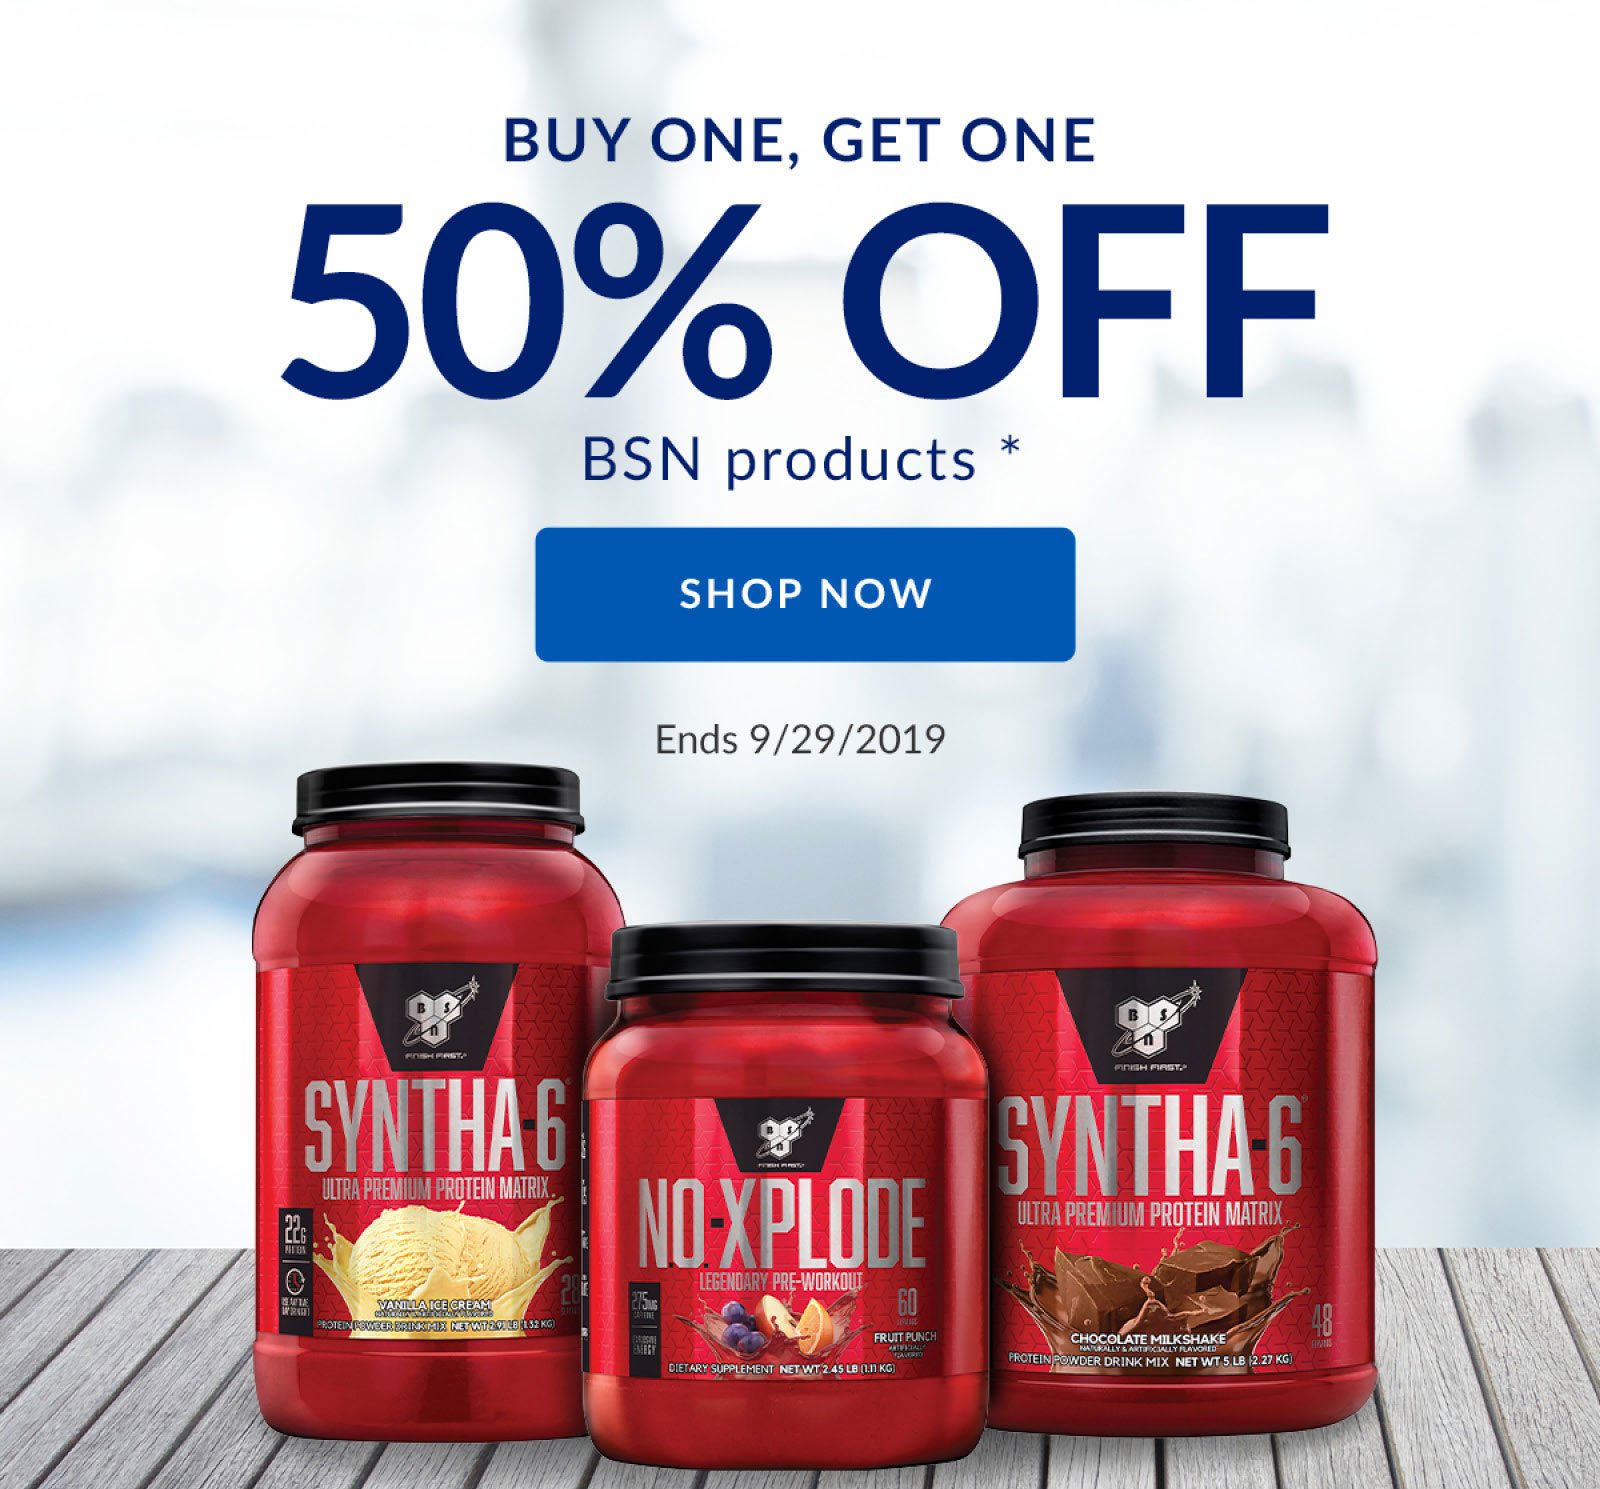 BUY ONE, GET ONE 50% OFF BSN products * | SHOP NOW | Ends 9/29/2019